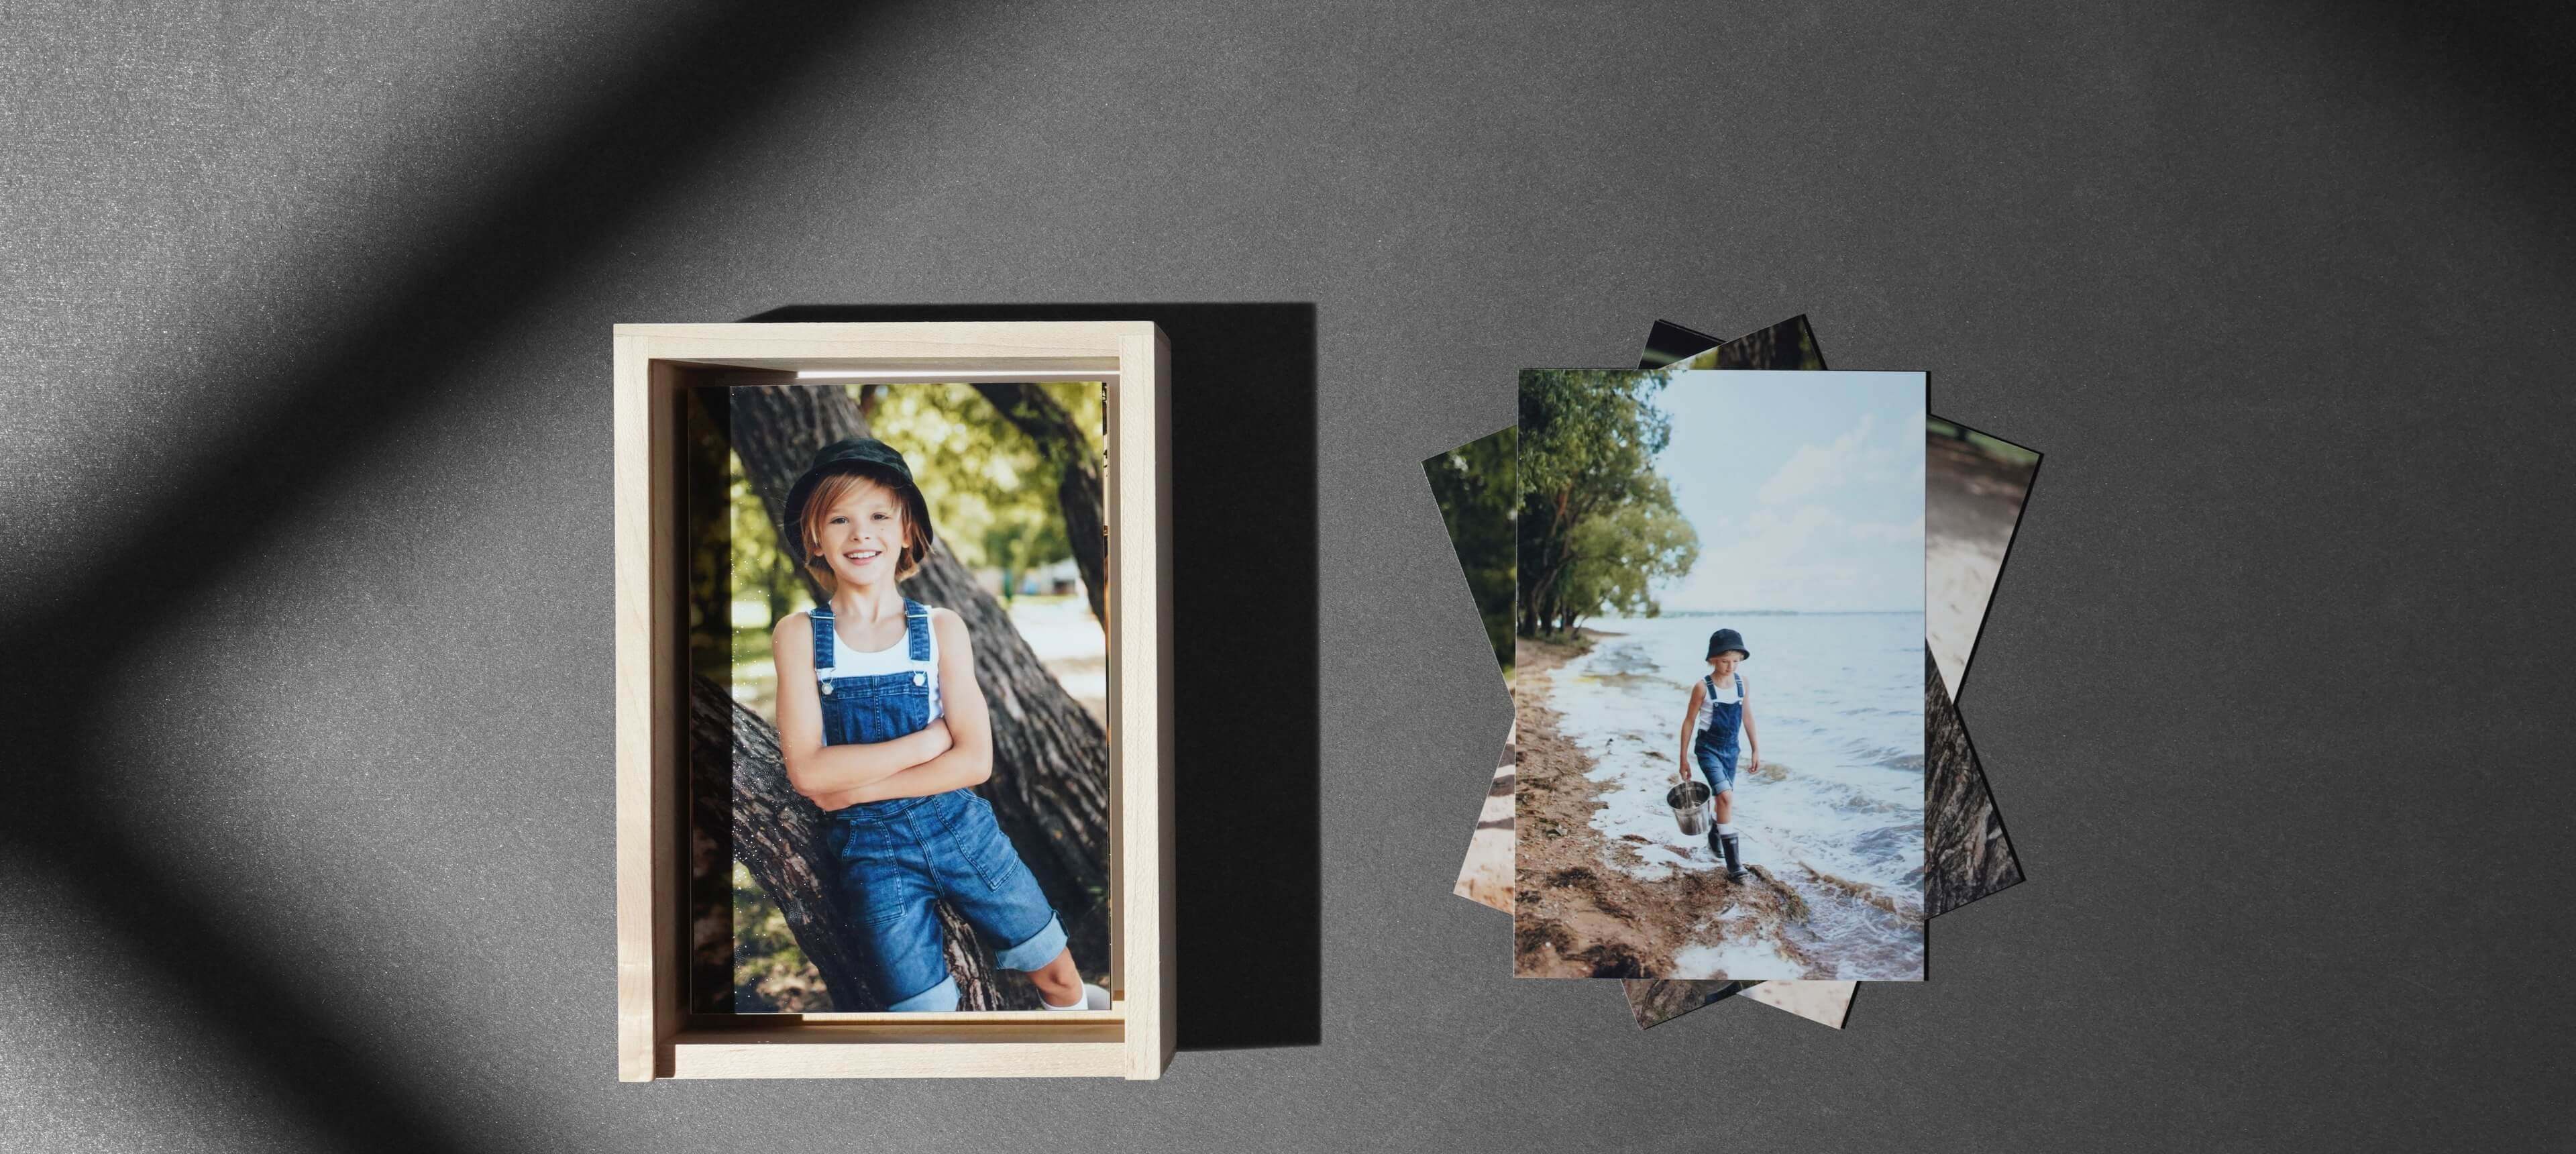 a wood box set showing prints of a boy inside next to a stack of photo prints